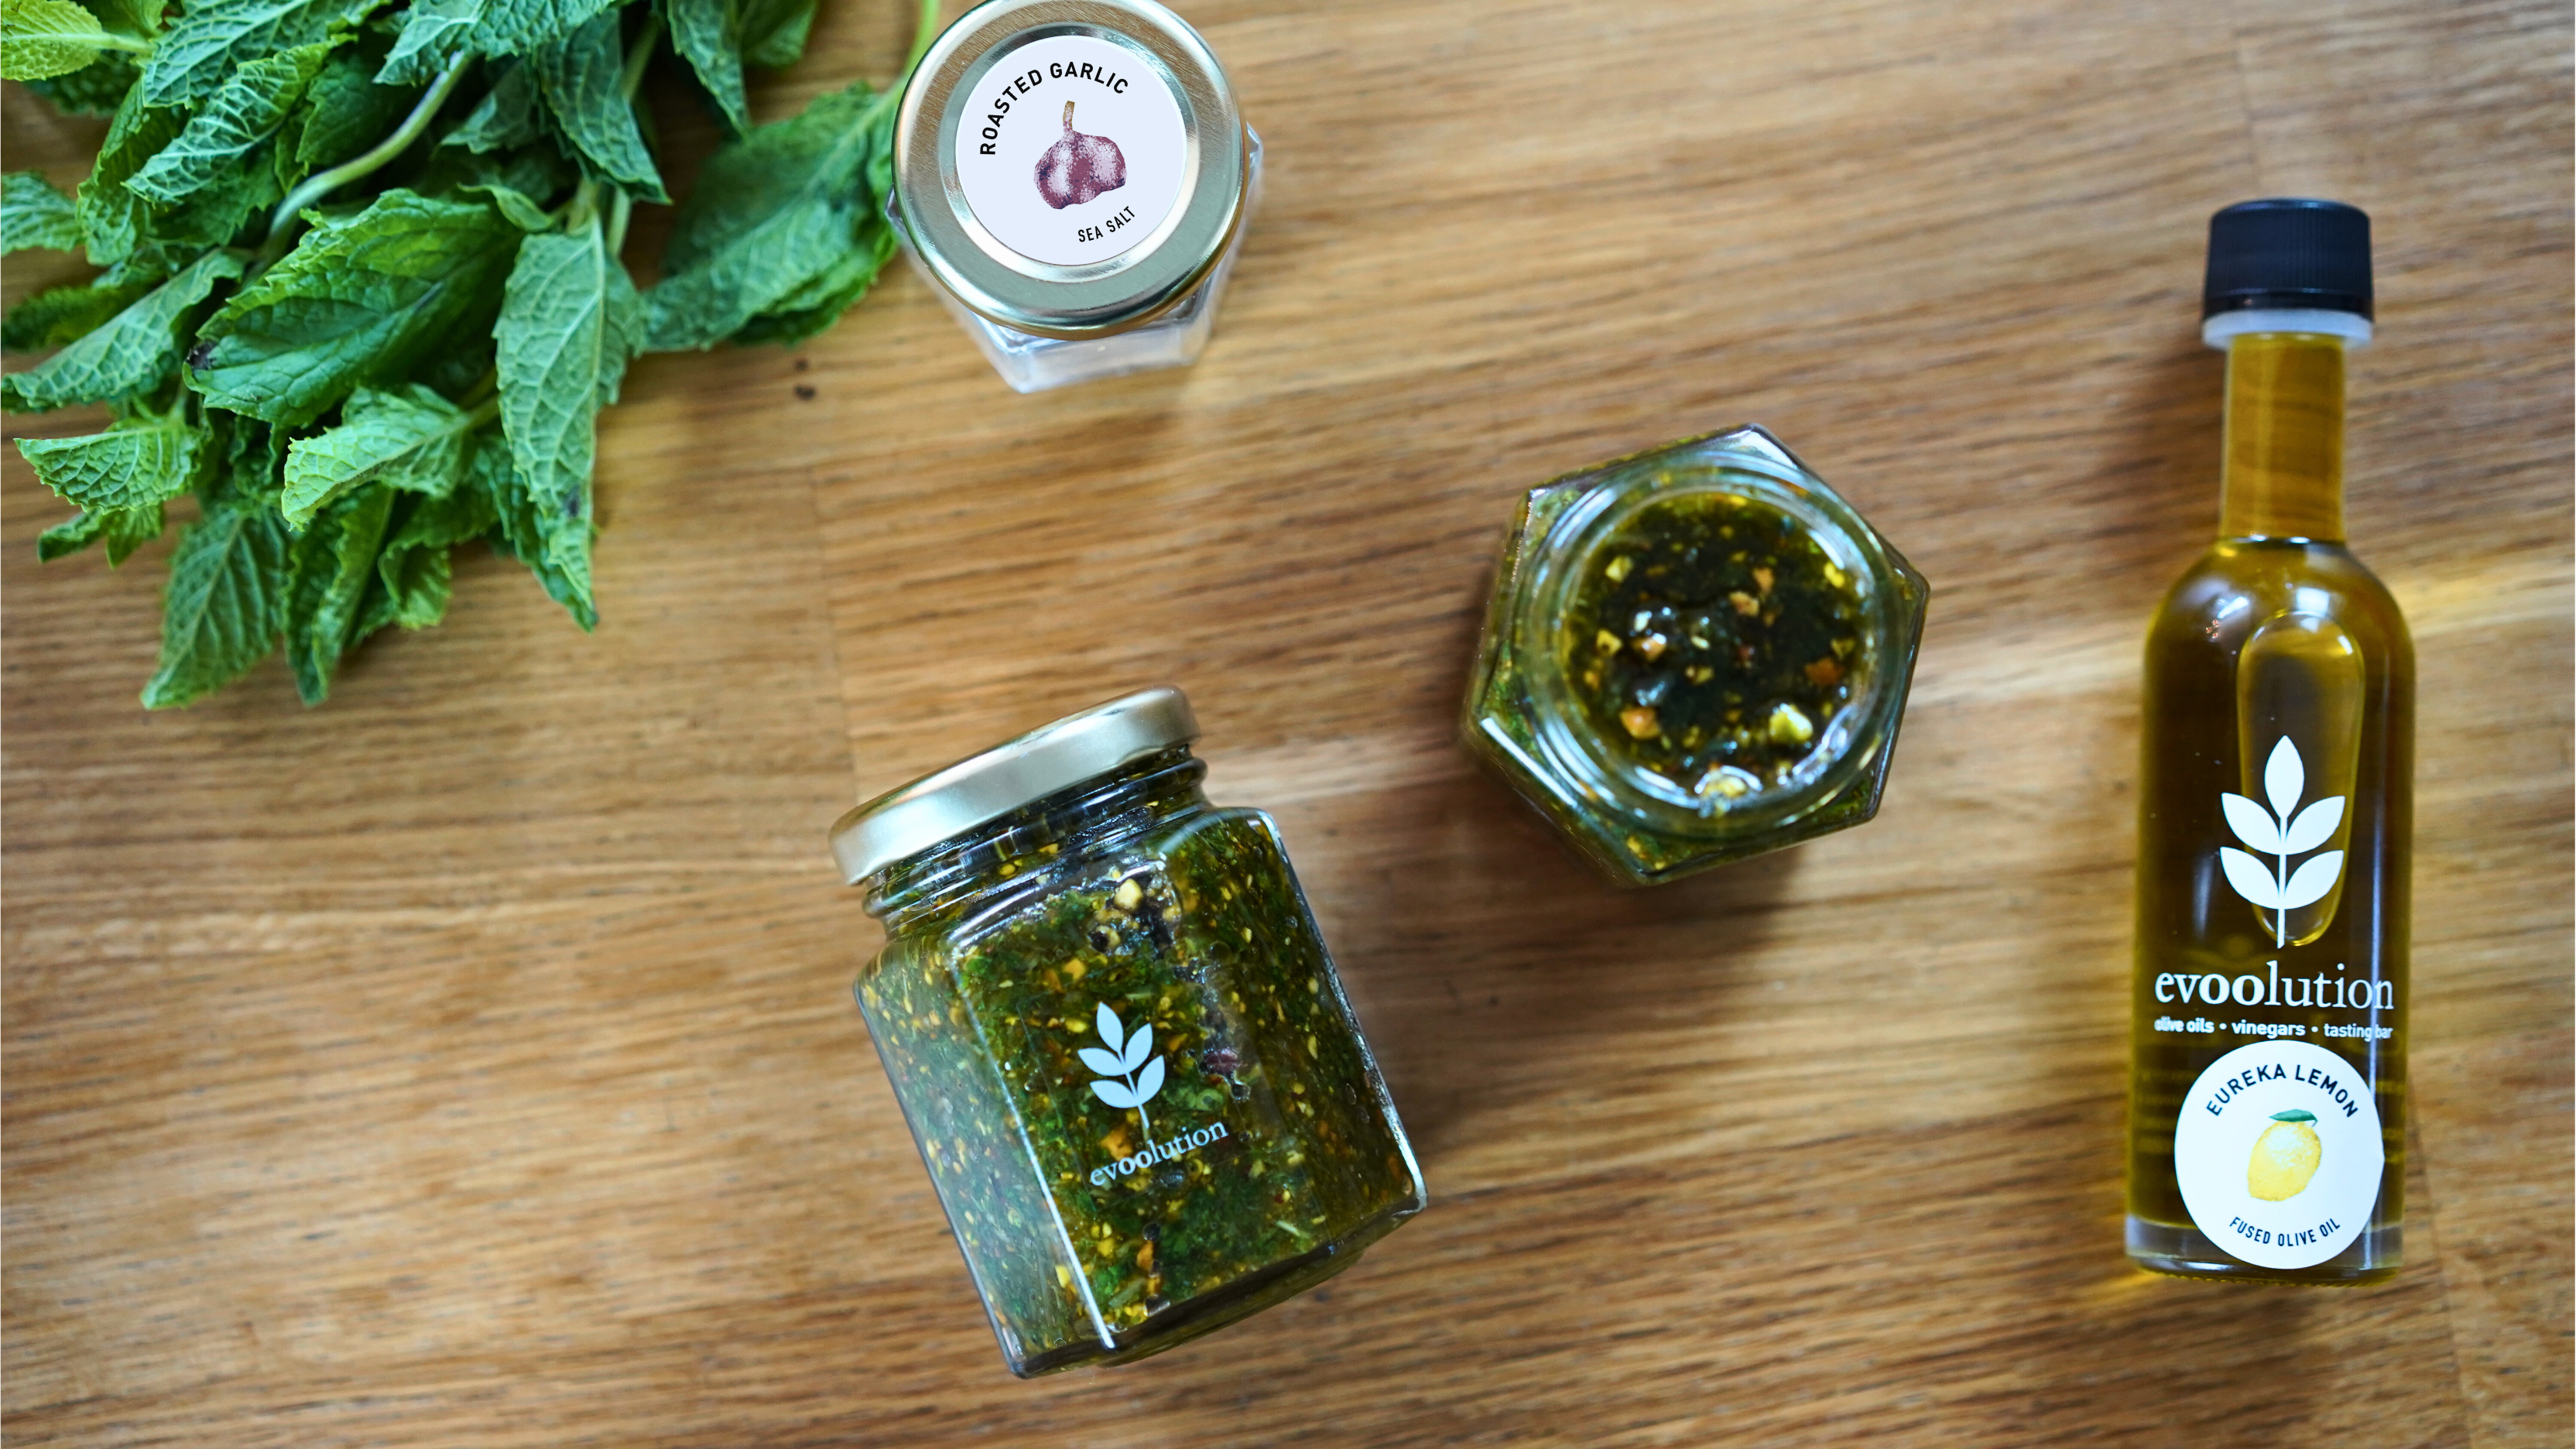 Pistachio mint pesto is packed in an empty salt jar and ready for the freezer.